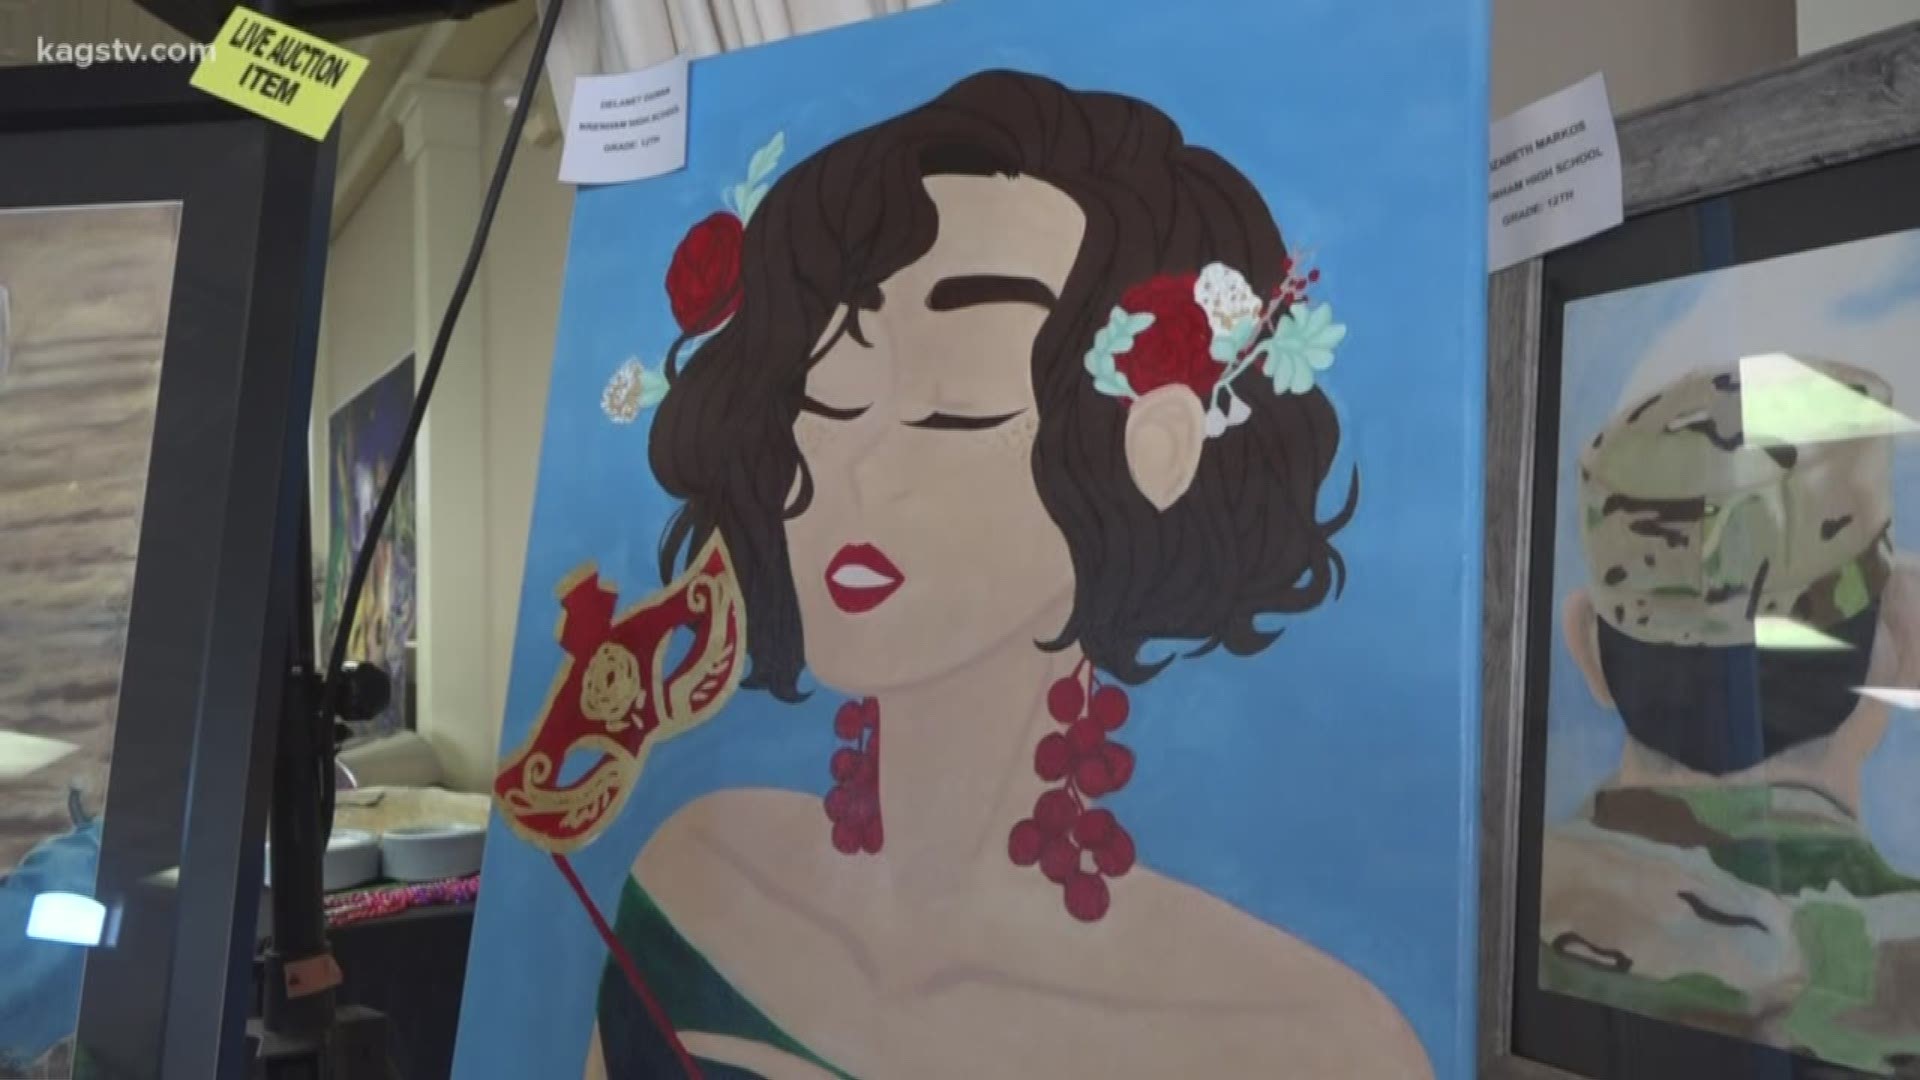 The showcase had more than 50 pieces of student artwork that were auctioned off.